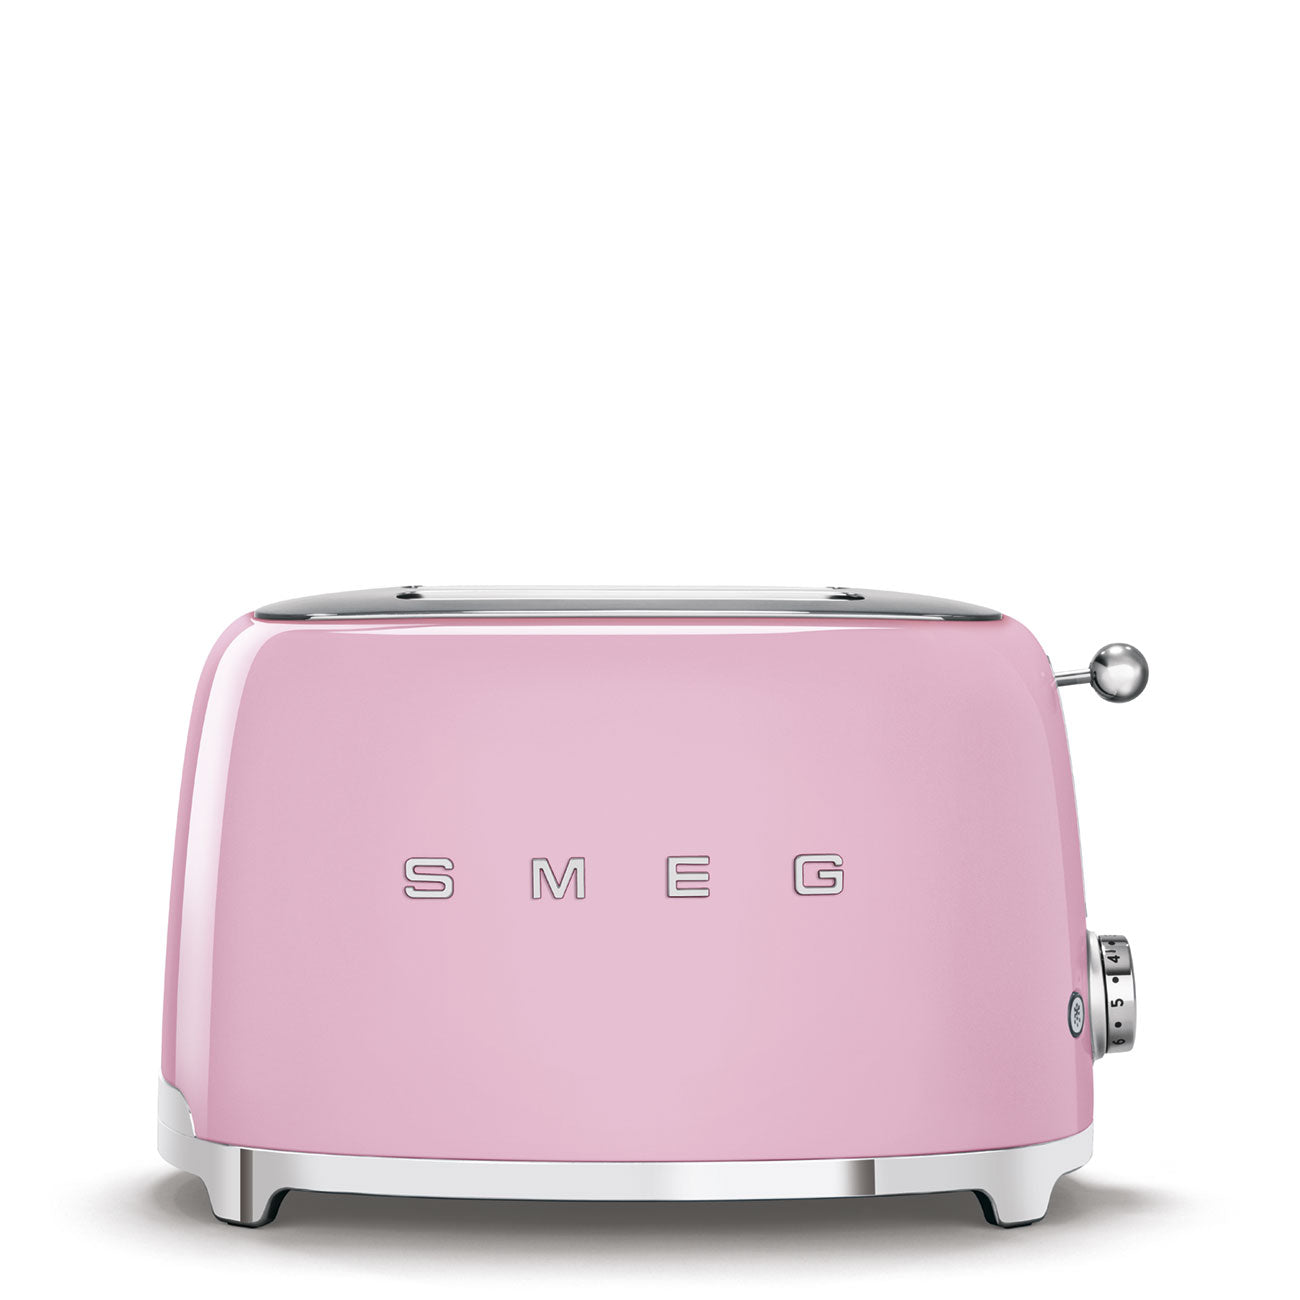 Grille-pain Deluxe 2 tranches Rose - Smeg